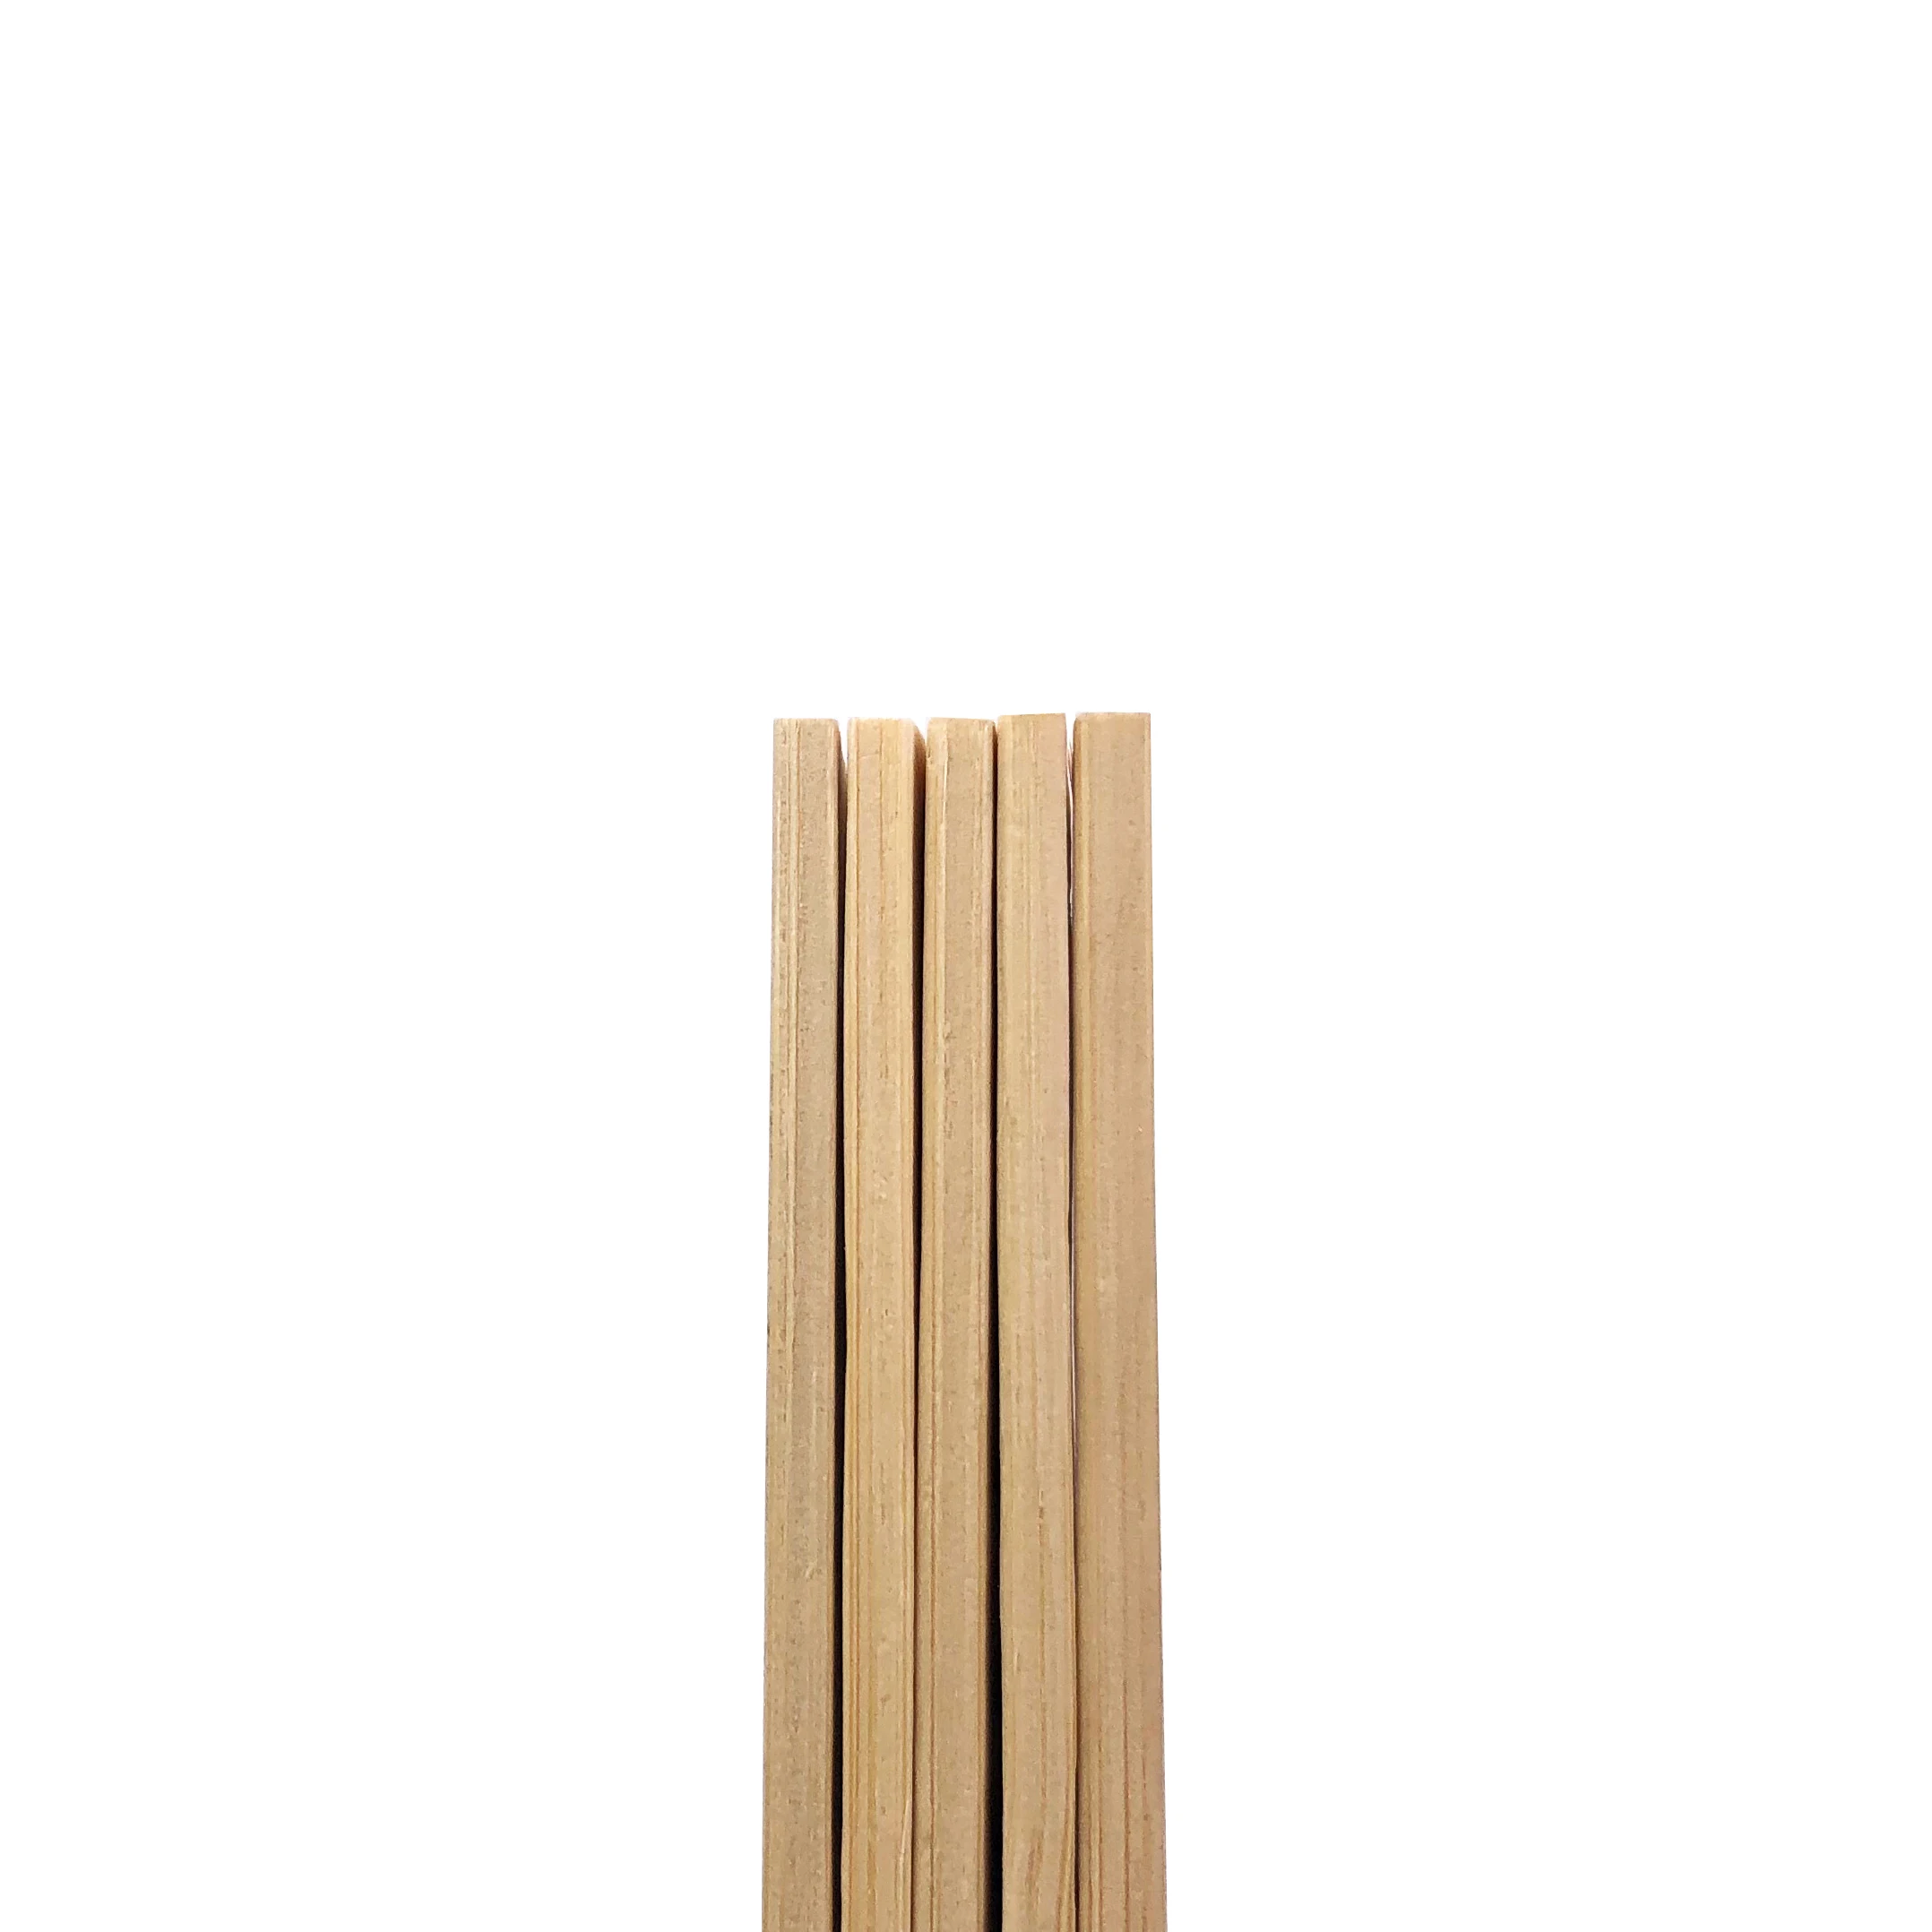 10 Inch Bamboo Paint Mixing Sticks for Stir Paint